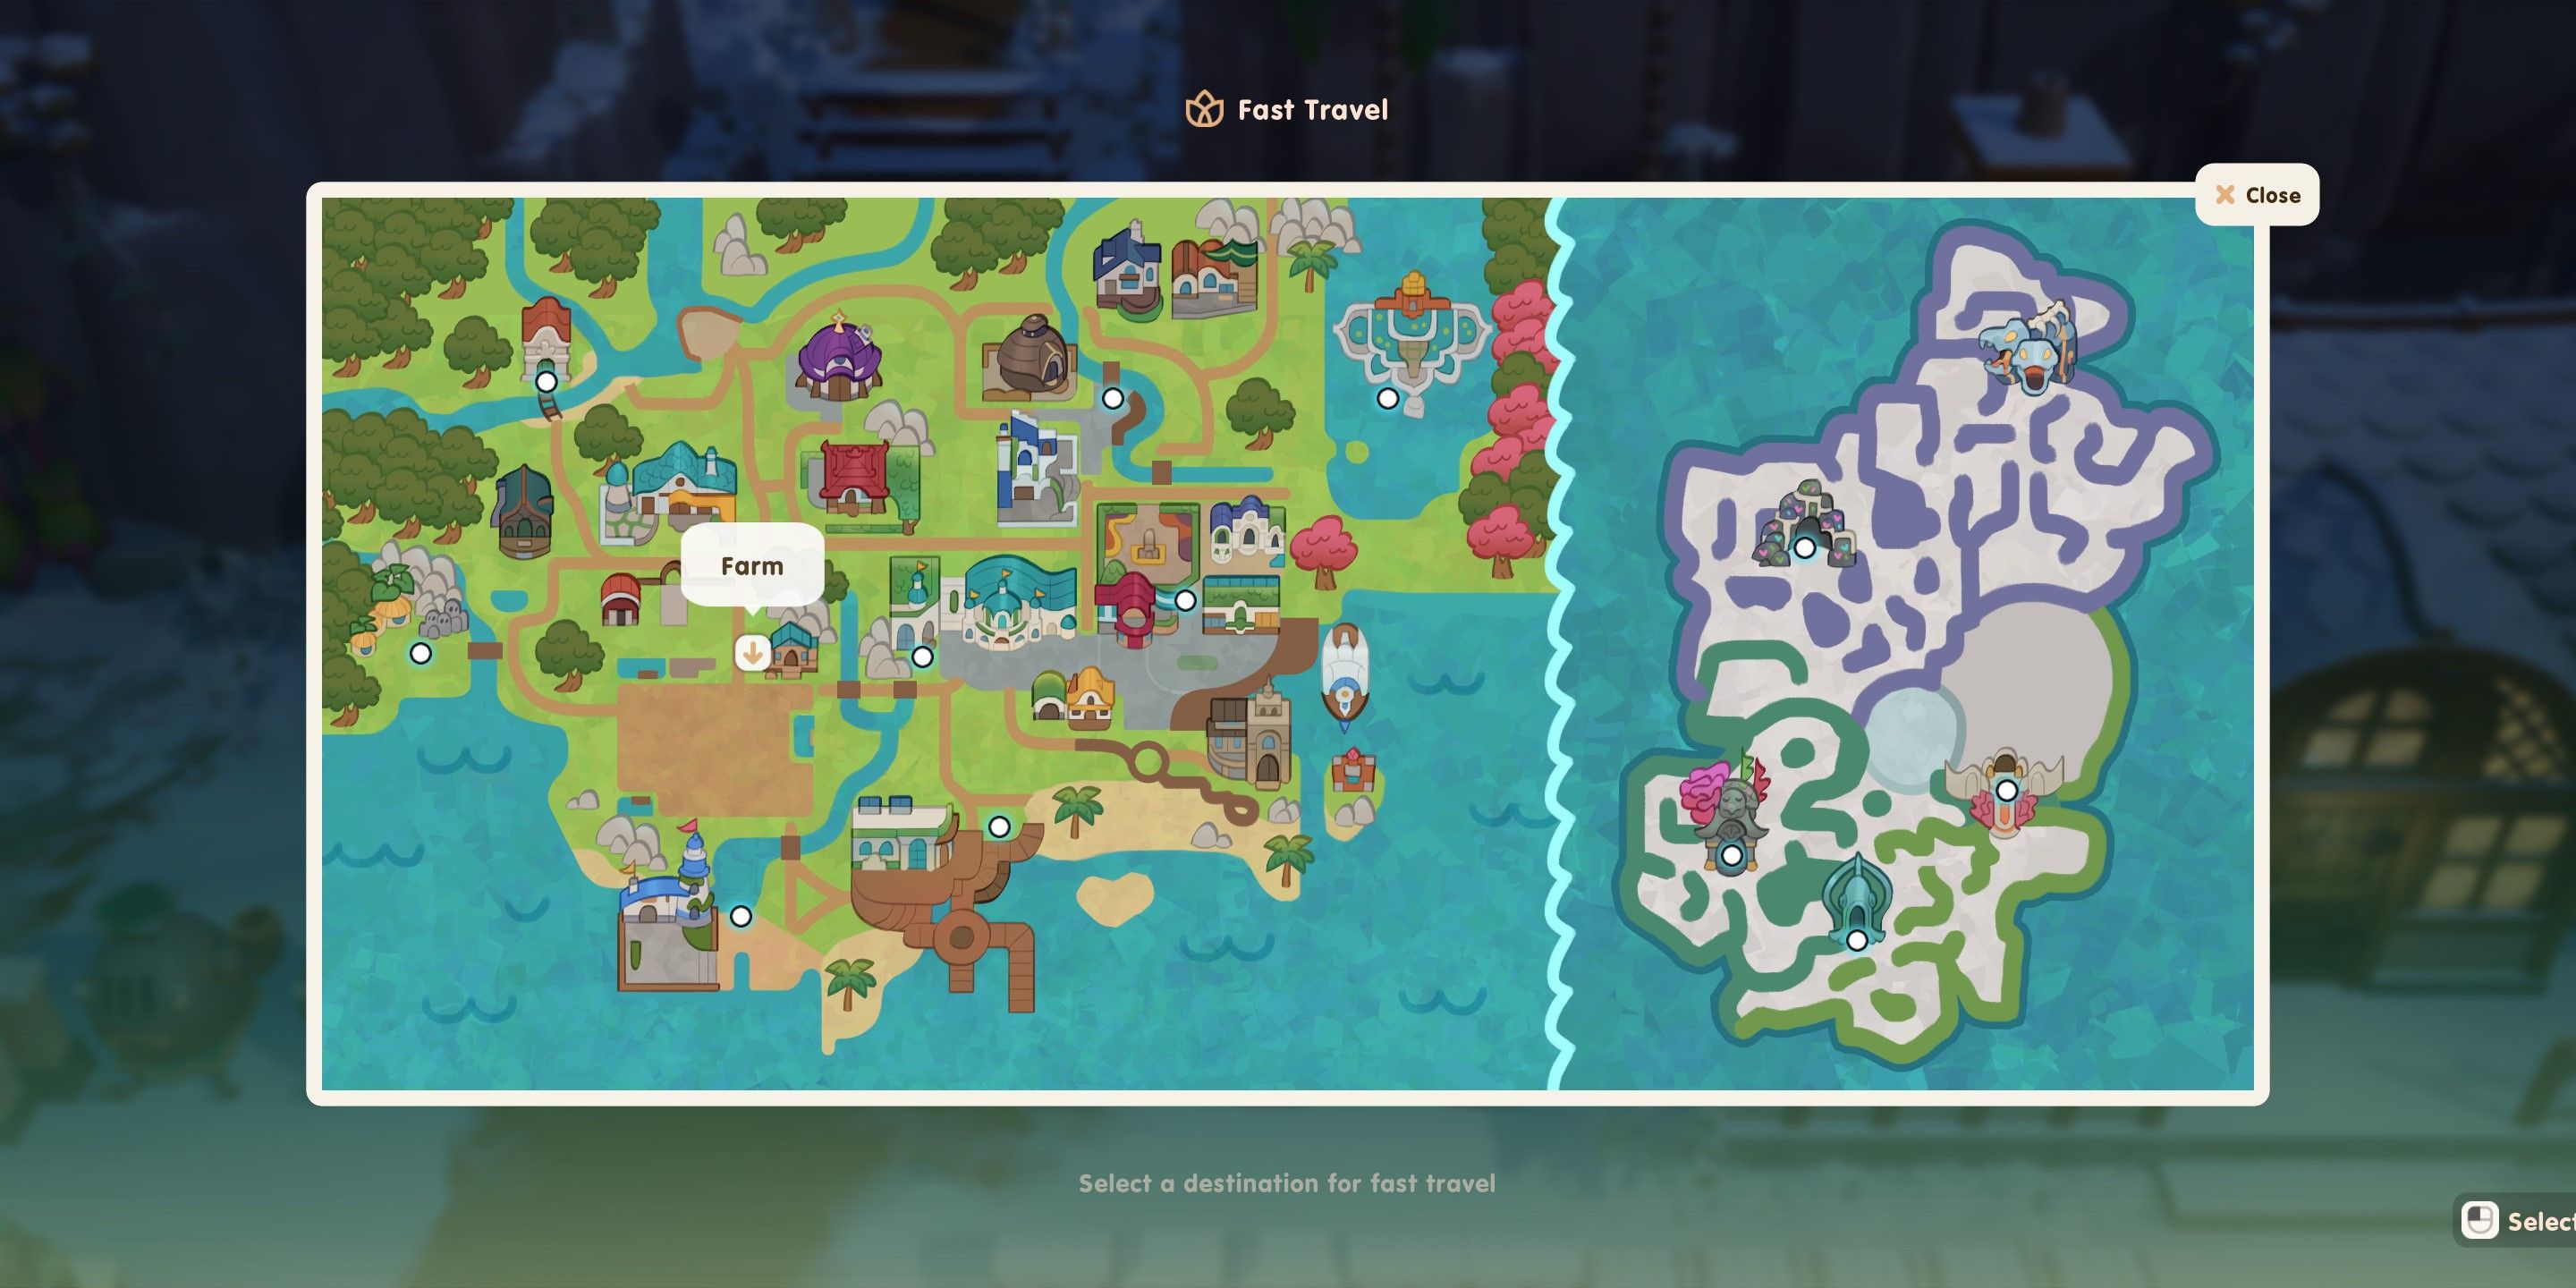 Coral Island: An image of both the Coral Island shrine map and underwater shrine map